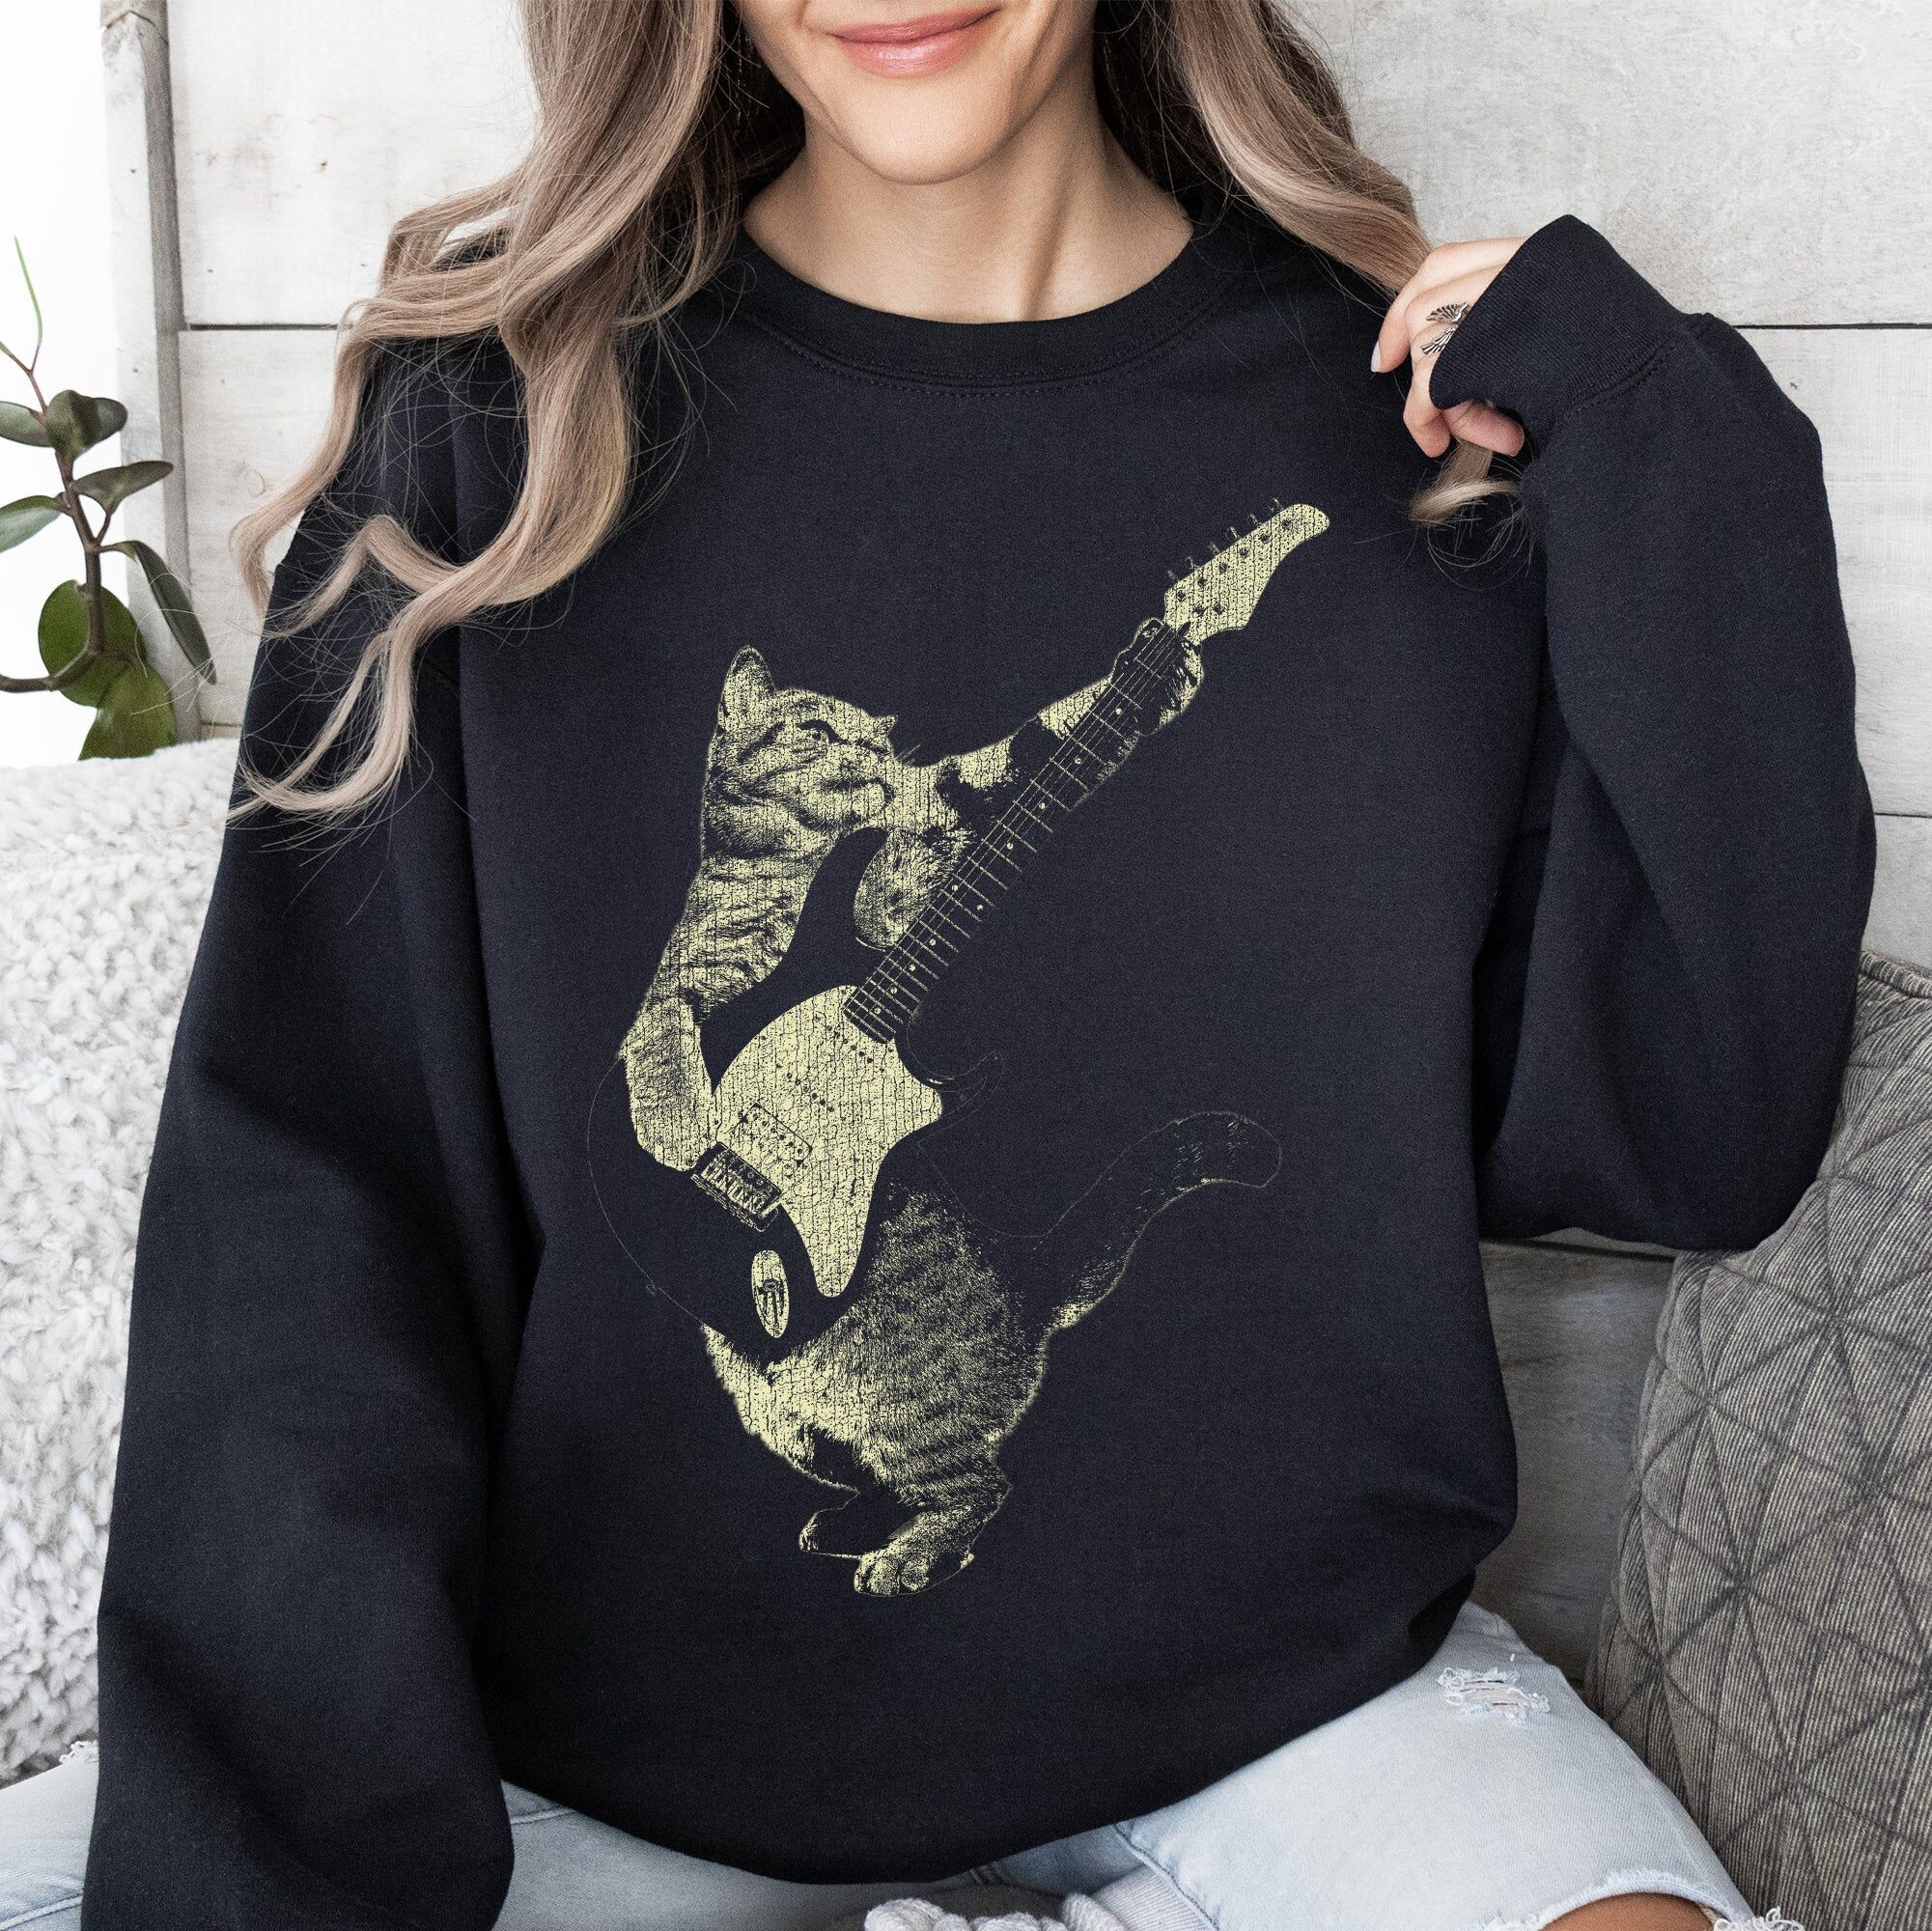 Refinery No. 1 Cat Playing a Guitar, Funny Animals Sweatshirt Large